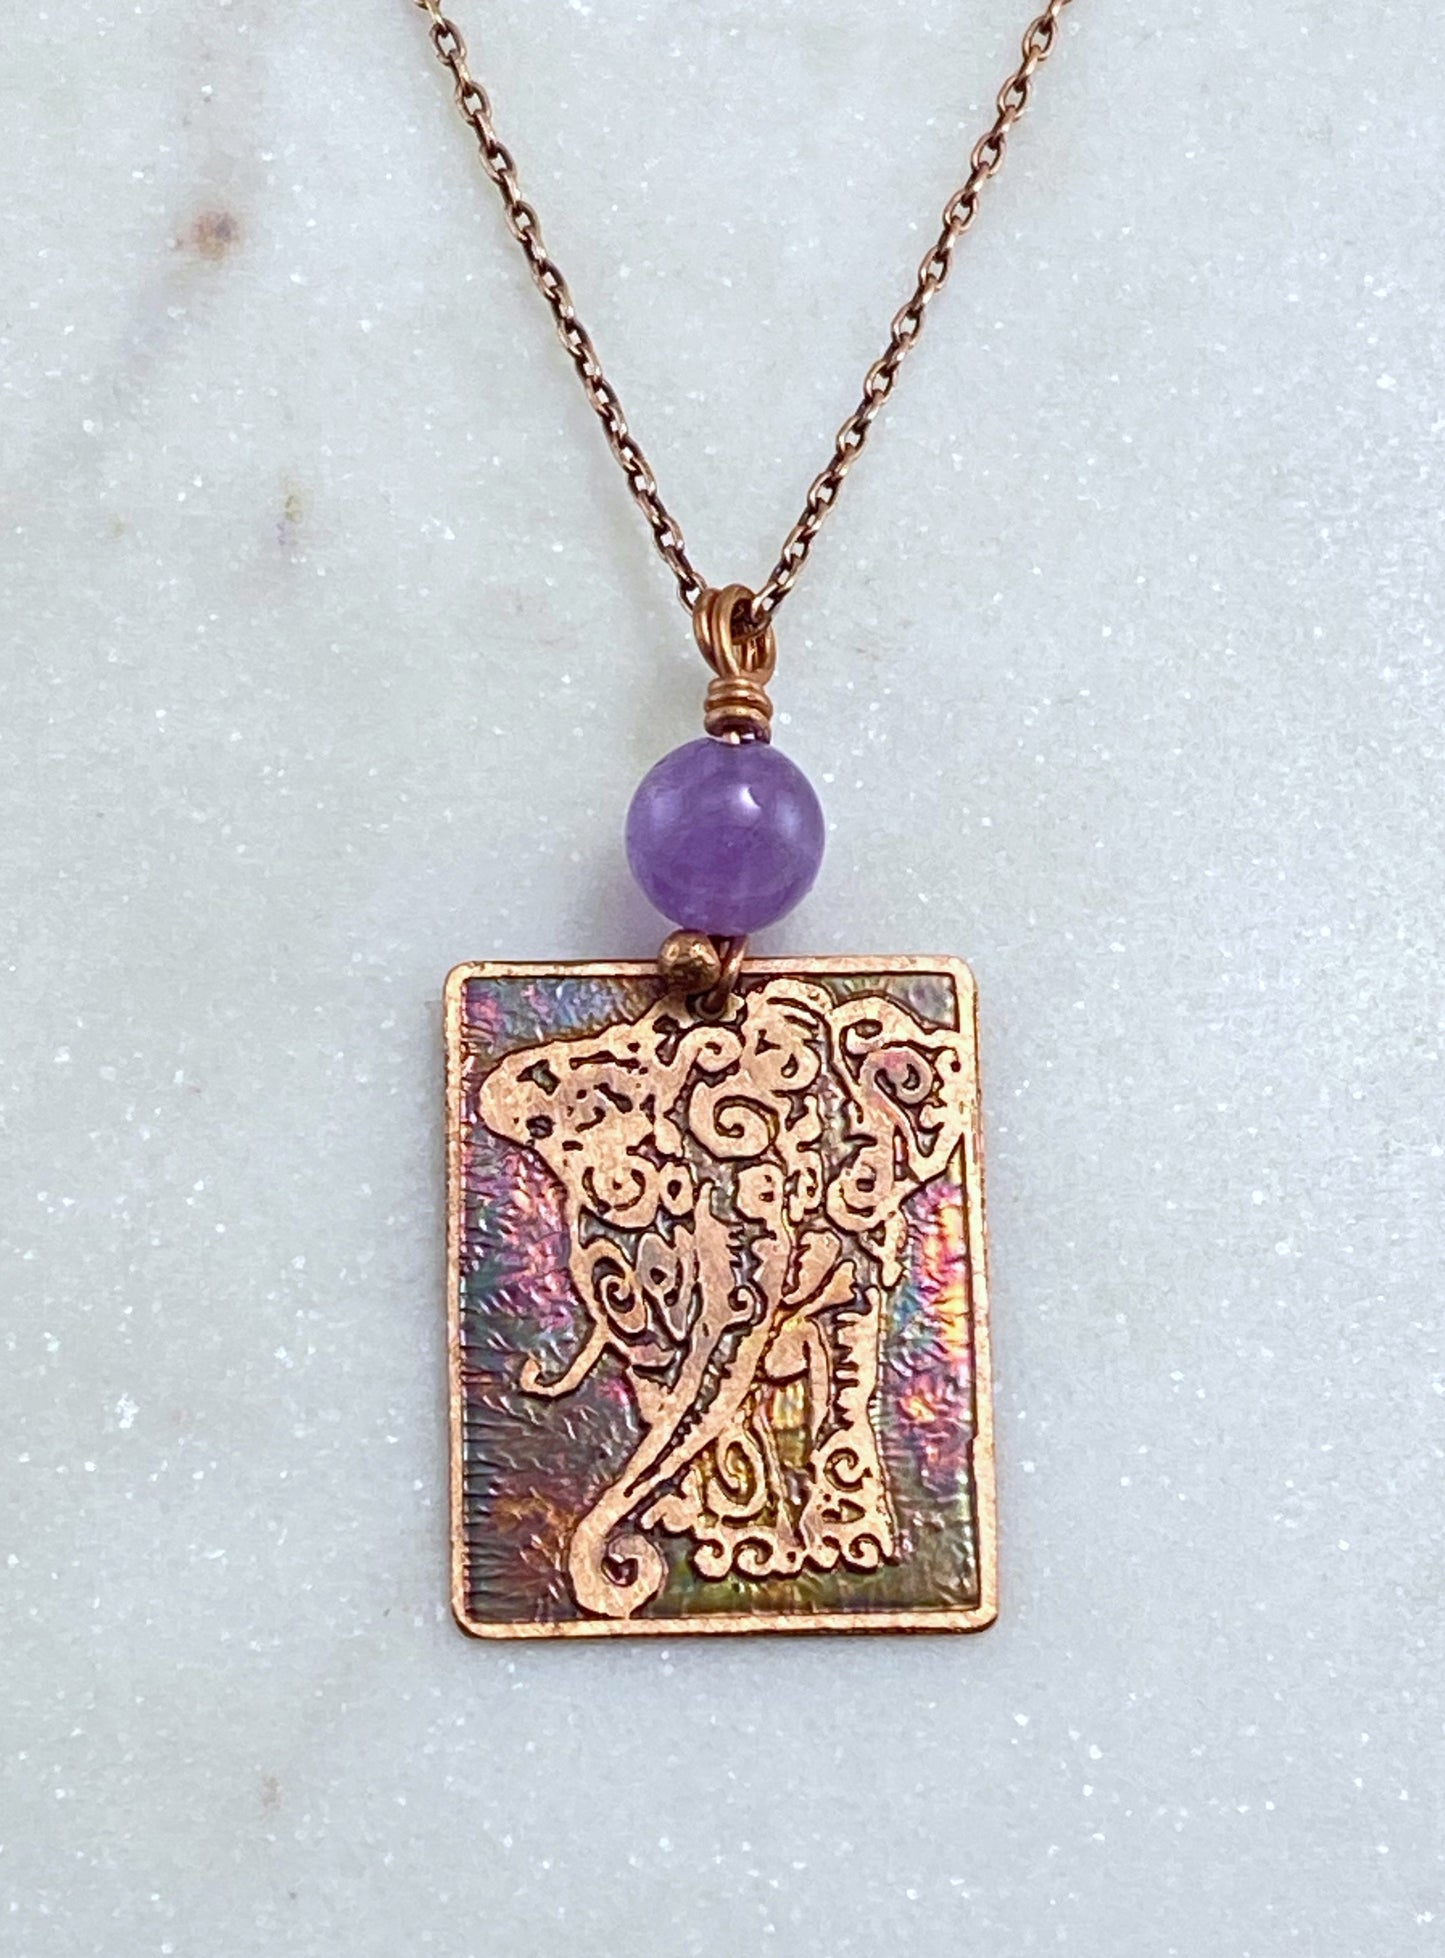 Acid etched copper elephant necklace with amethyst